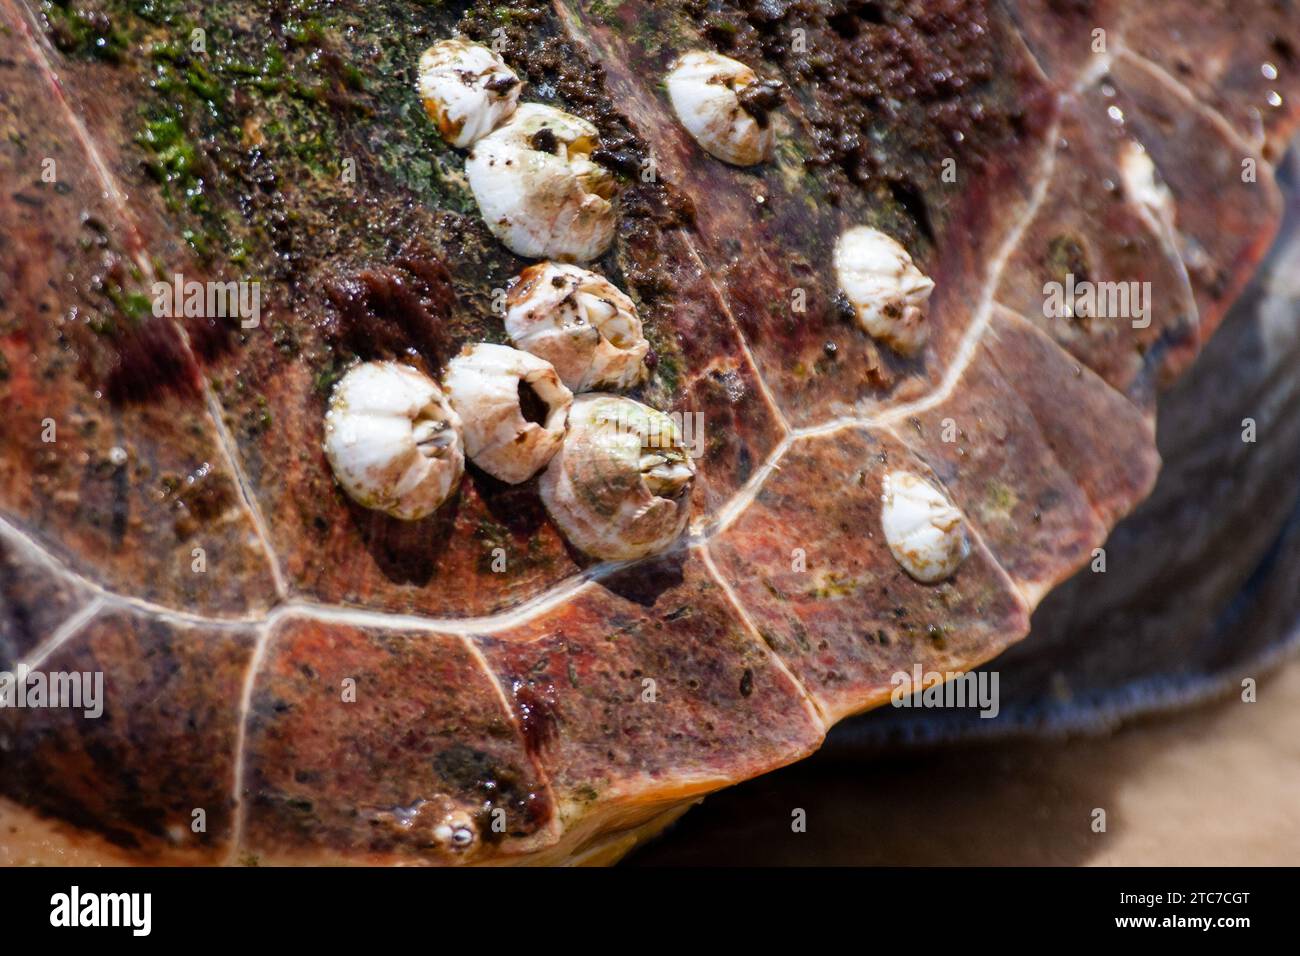 Barnacles on Loggerhead sea turtle shell Barnacles are crustaceans that attach themselves to surfaces using a strong glue. Photographed in Israel Stock Photo